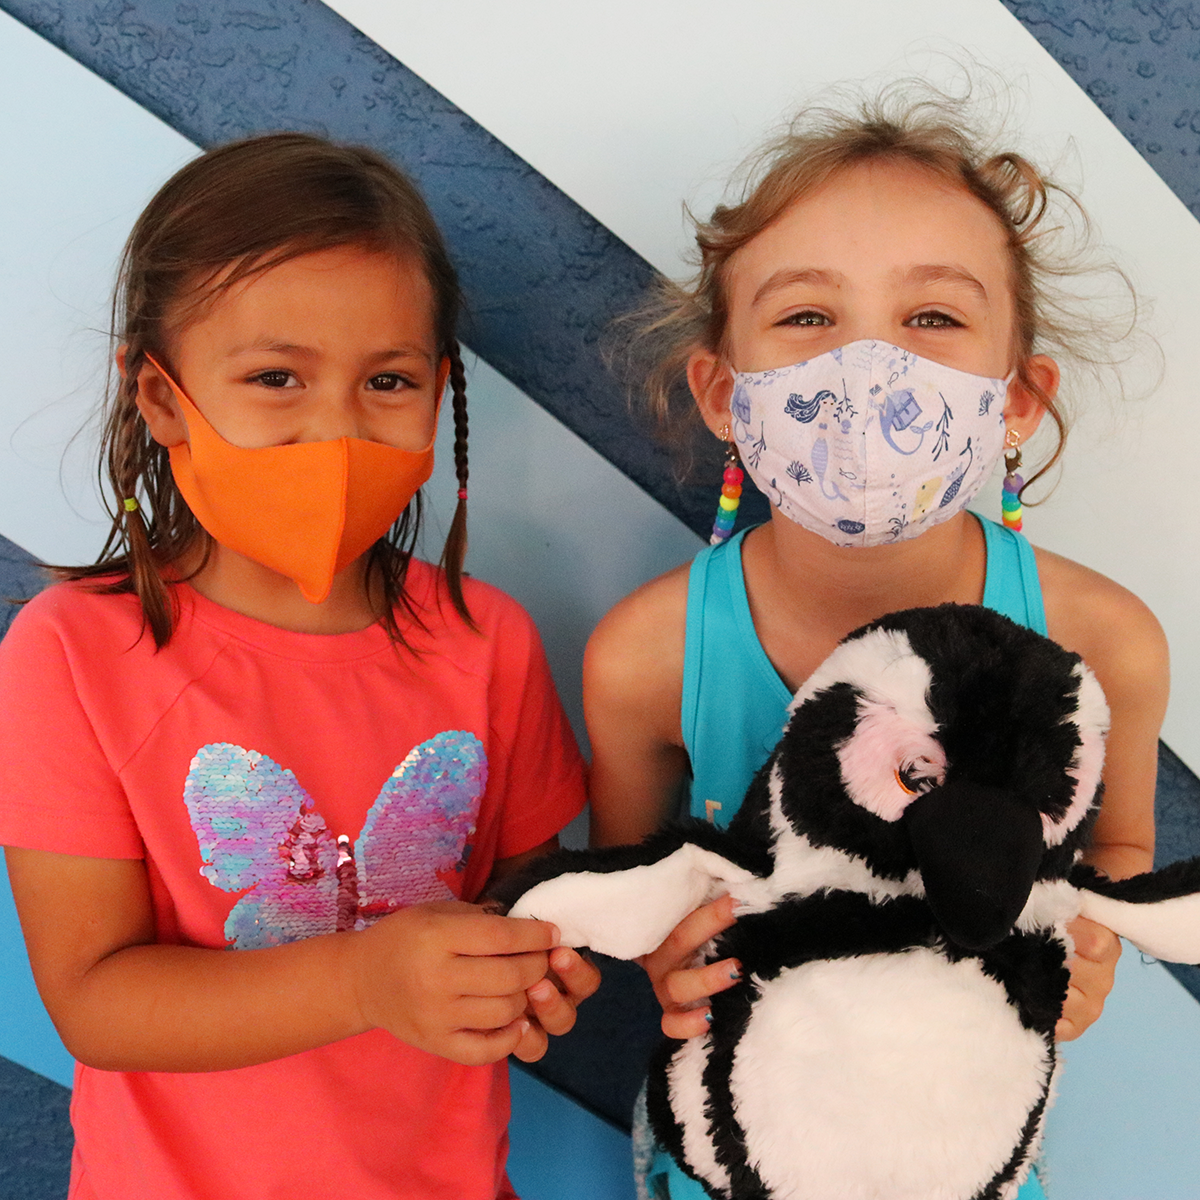 Two children holding a penguin plush toy